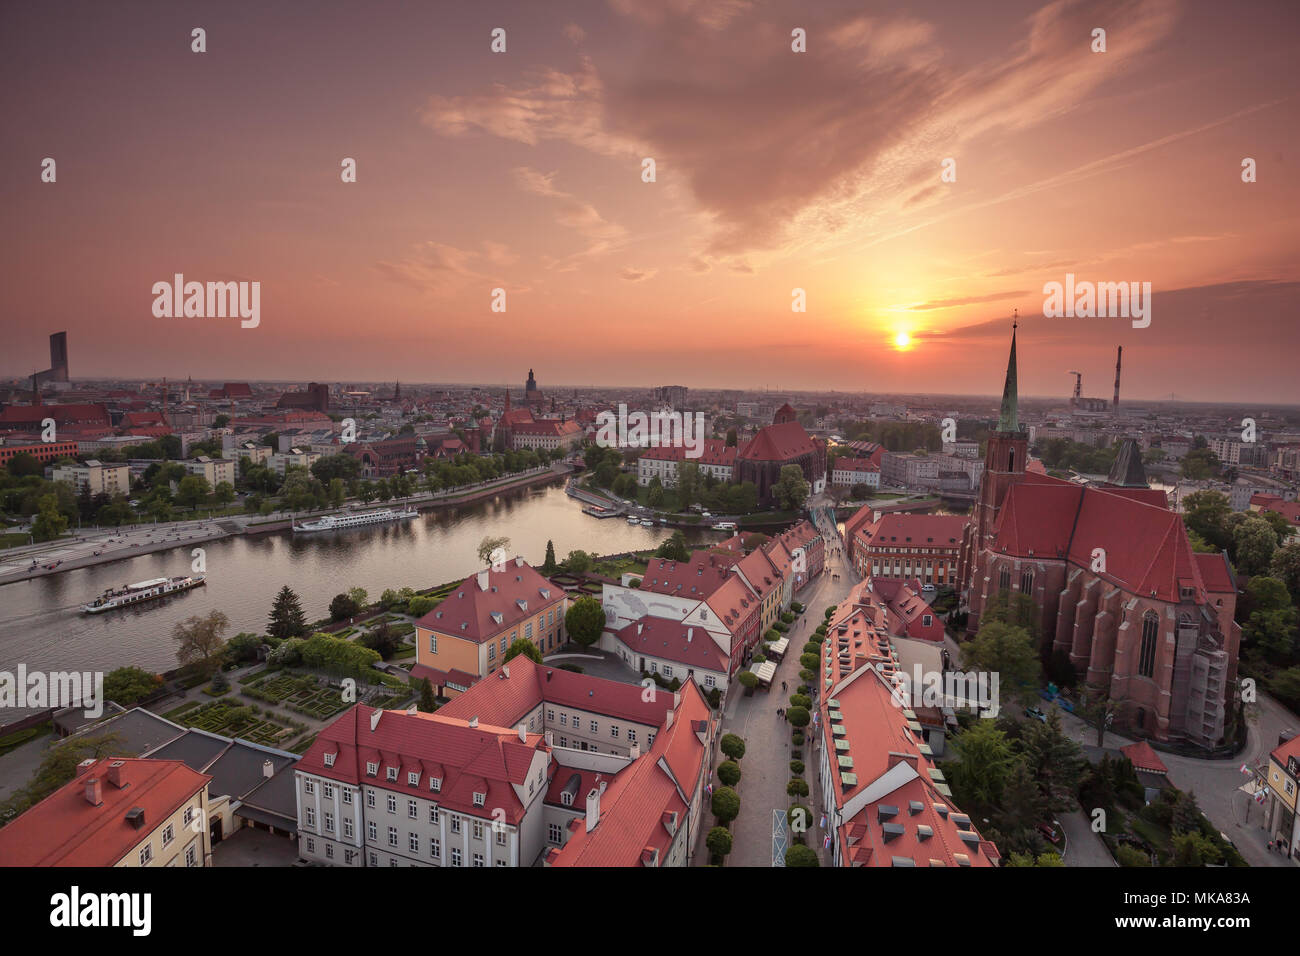 Wroclaw city in Poland aerial view at night Stock Photo